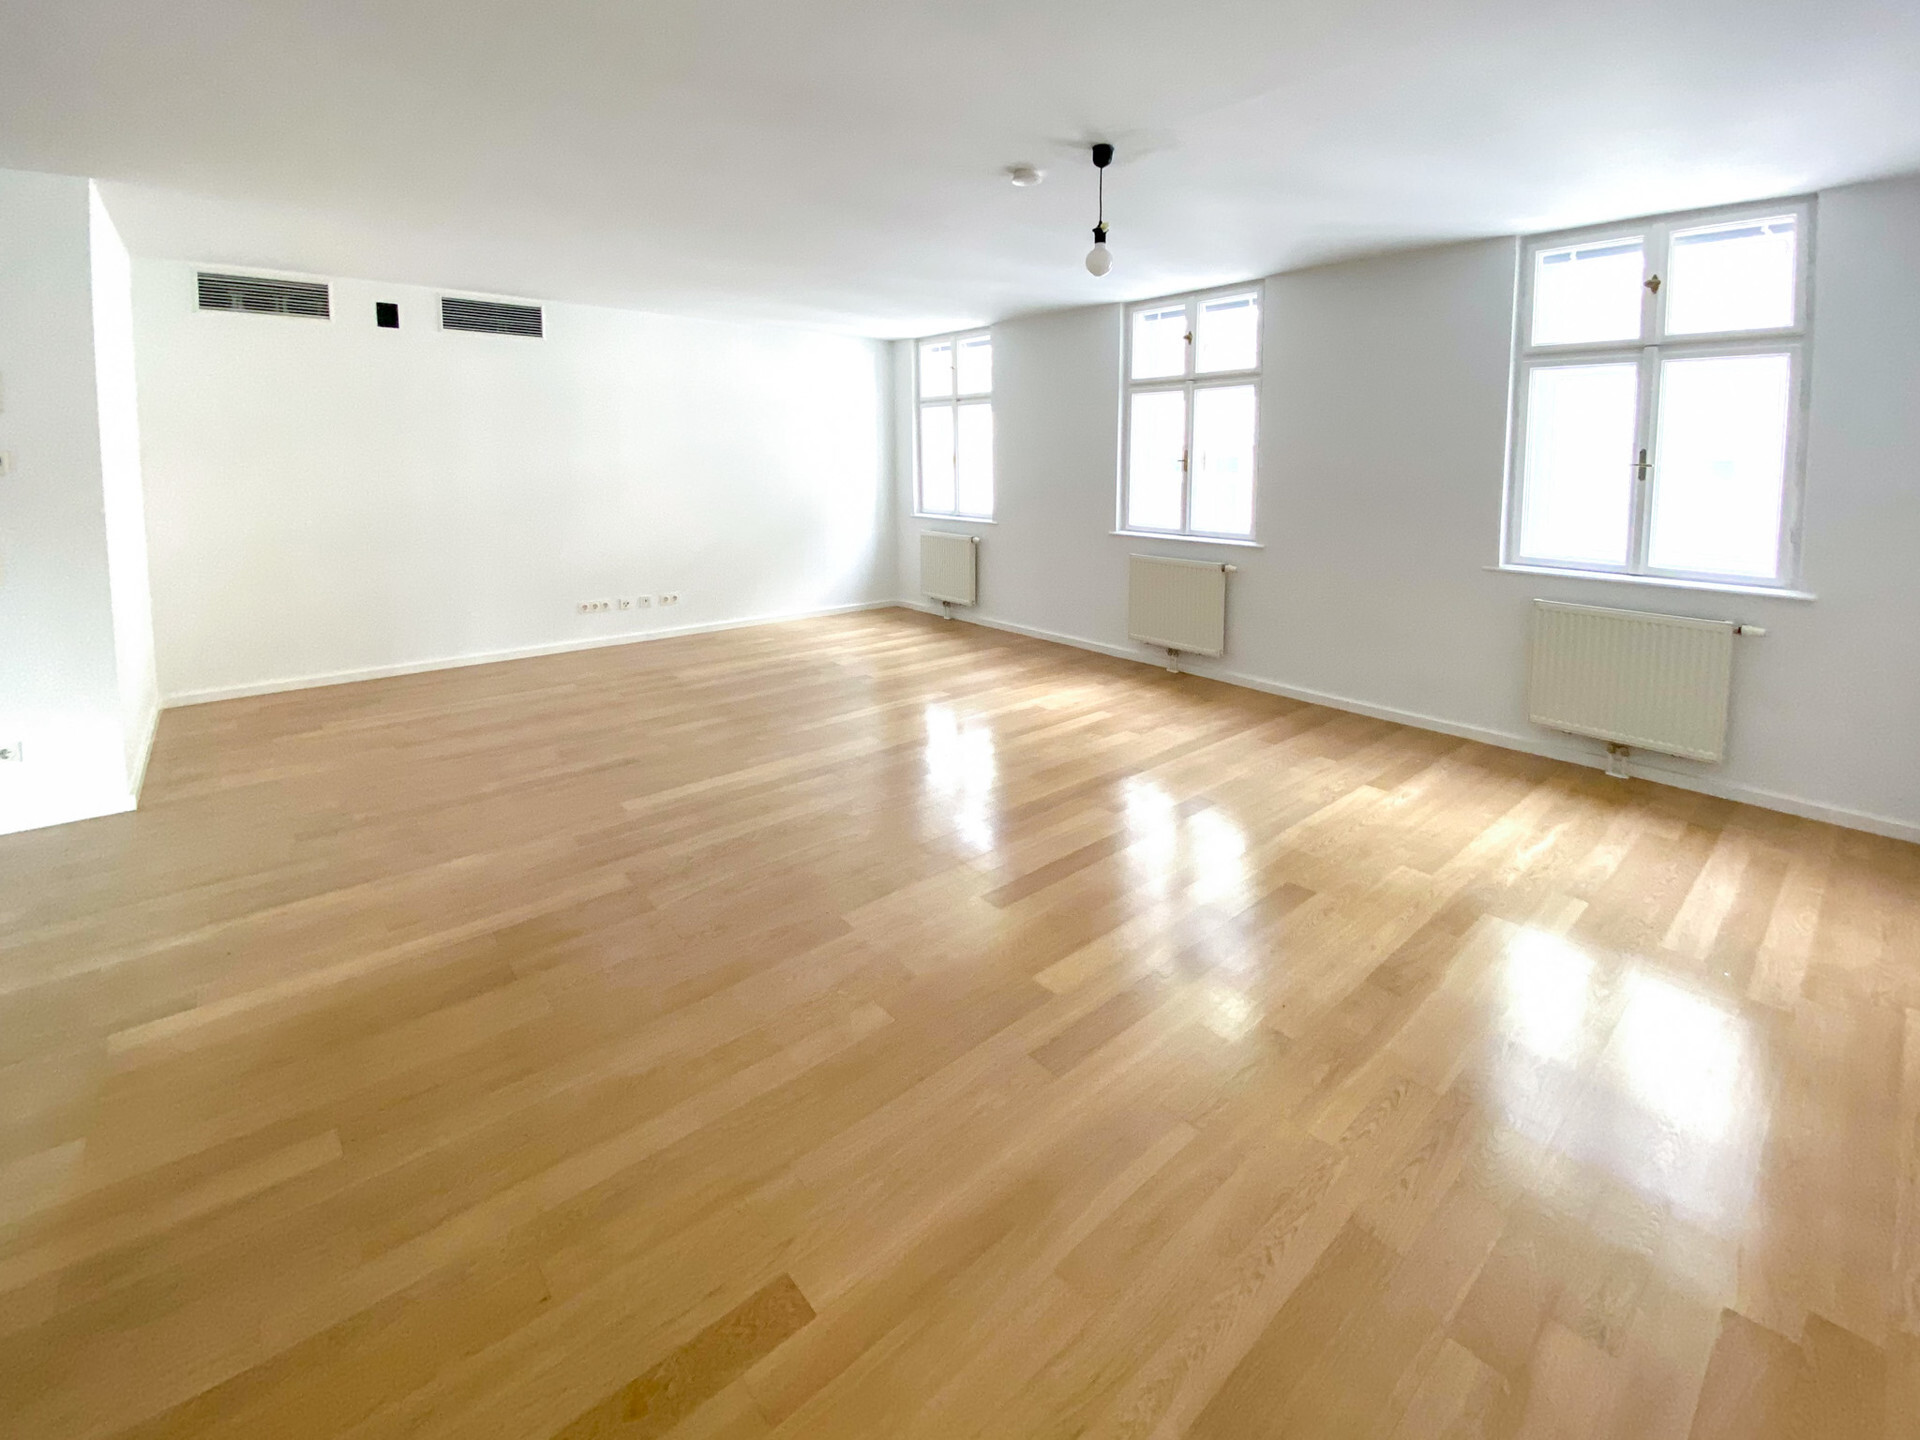 3-room apartment with loggia in the most central location directly on Rotenturmstraße for rent in 1010 Vienna